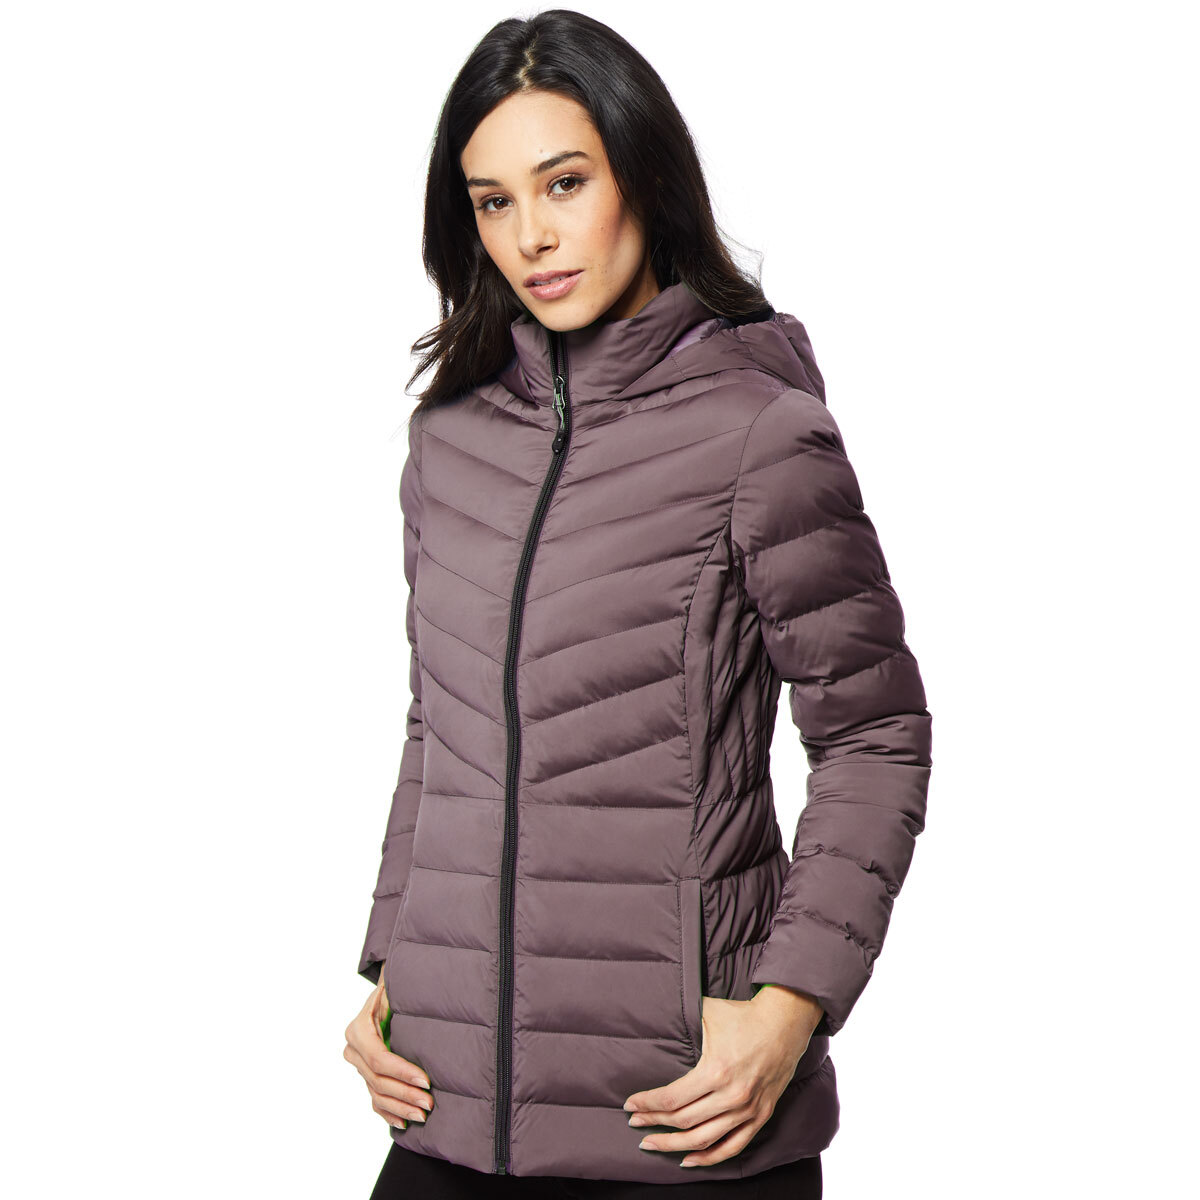 32 Degrees Heat Womens Hooded 4-Way Stretch Jacket 